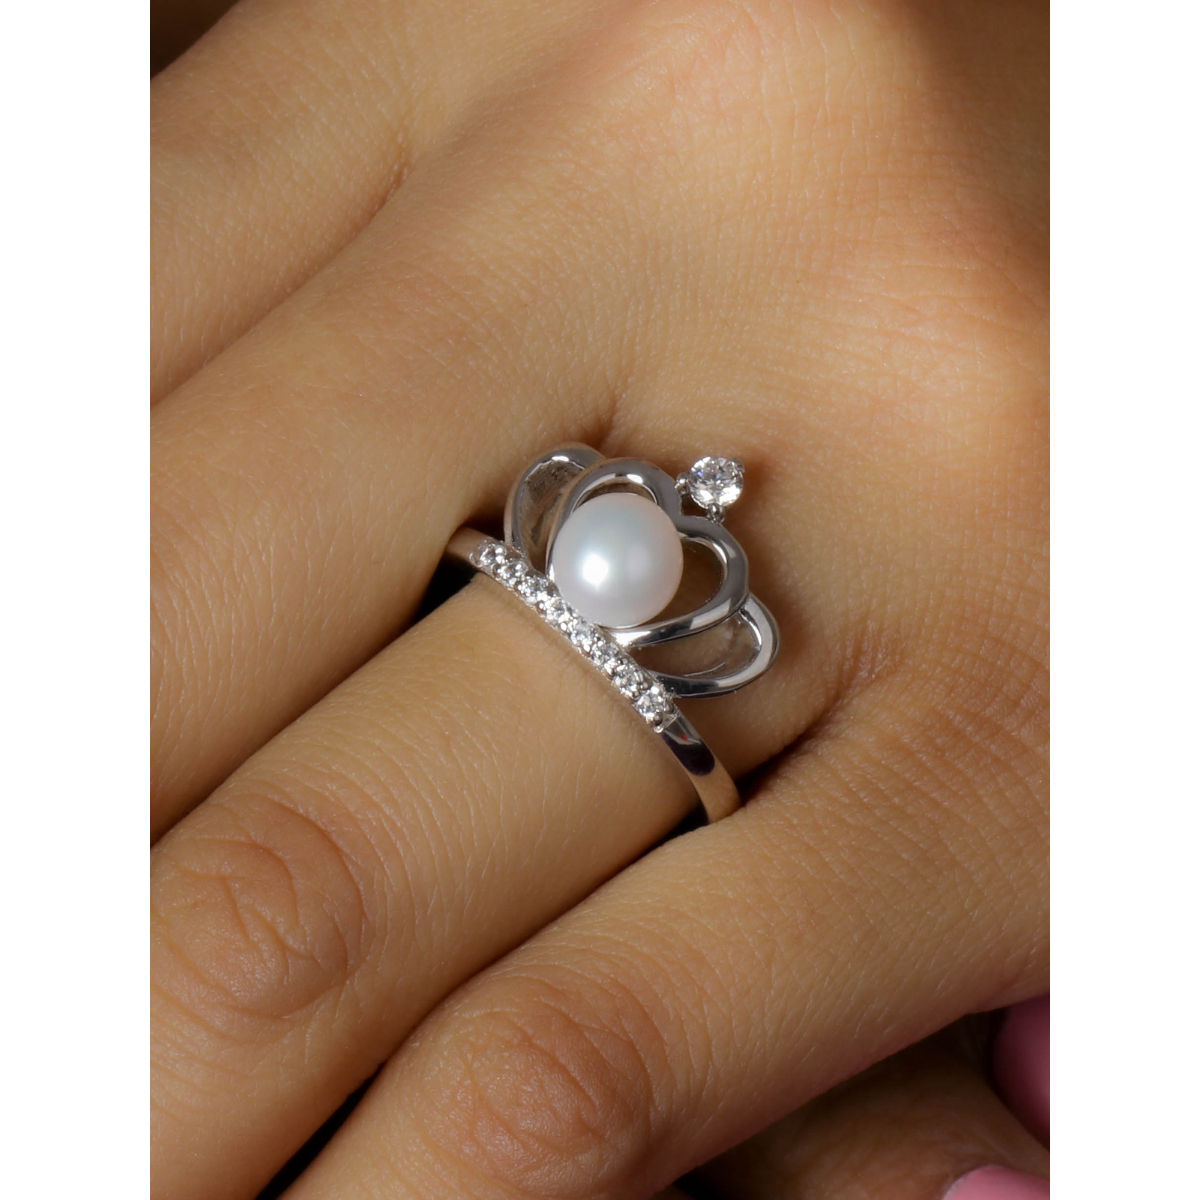 Buy Jewelgenics Crown Ring Silver Delicate Rings for Women & Girls (Pcs) at  Amazon.in